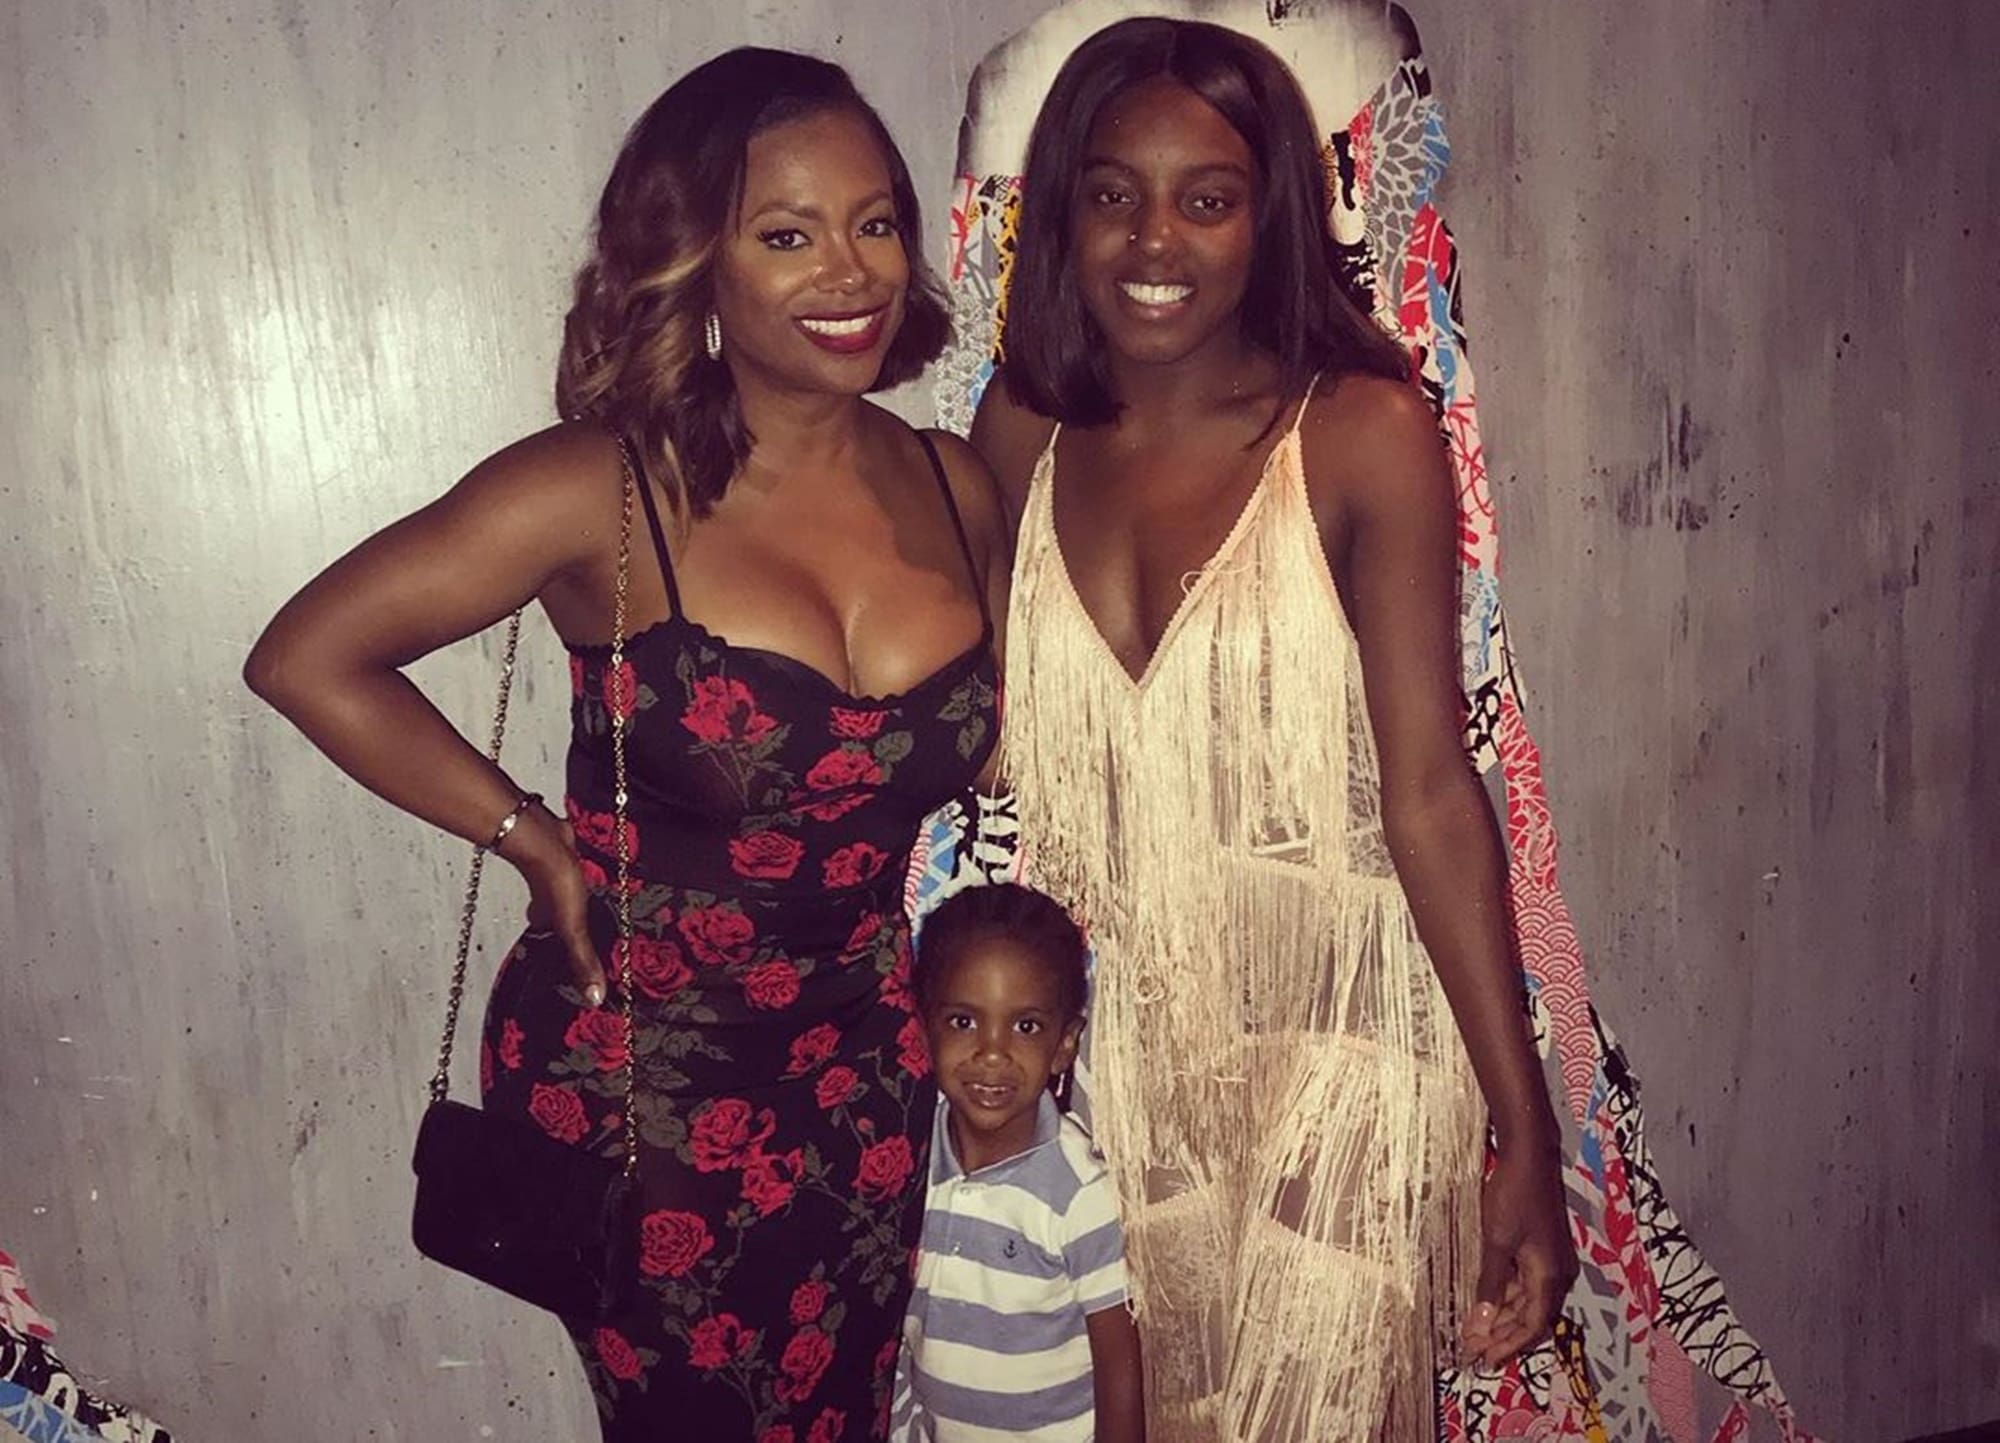 Kandi Burruss' New 'Speak On It' Episode In Out And Addresses Another Issue Involving Todd Tucker's Daughter, Kaela - Watch It Here